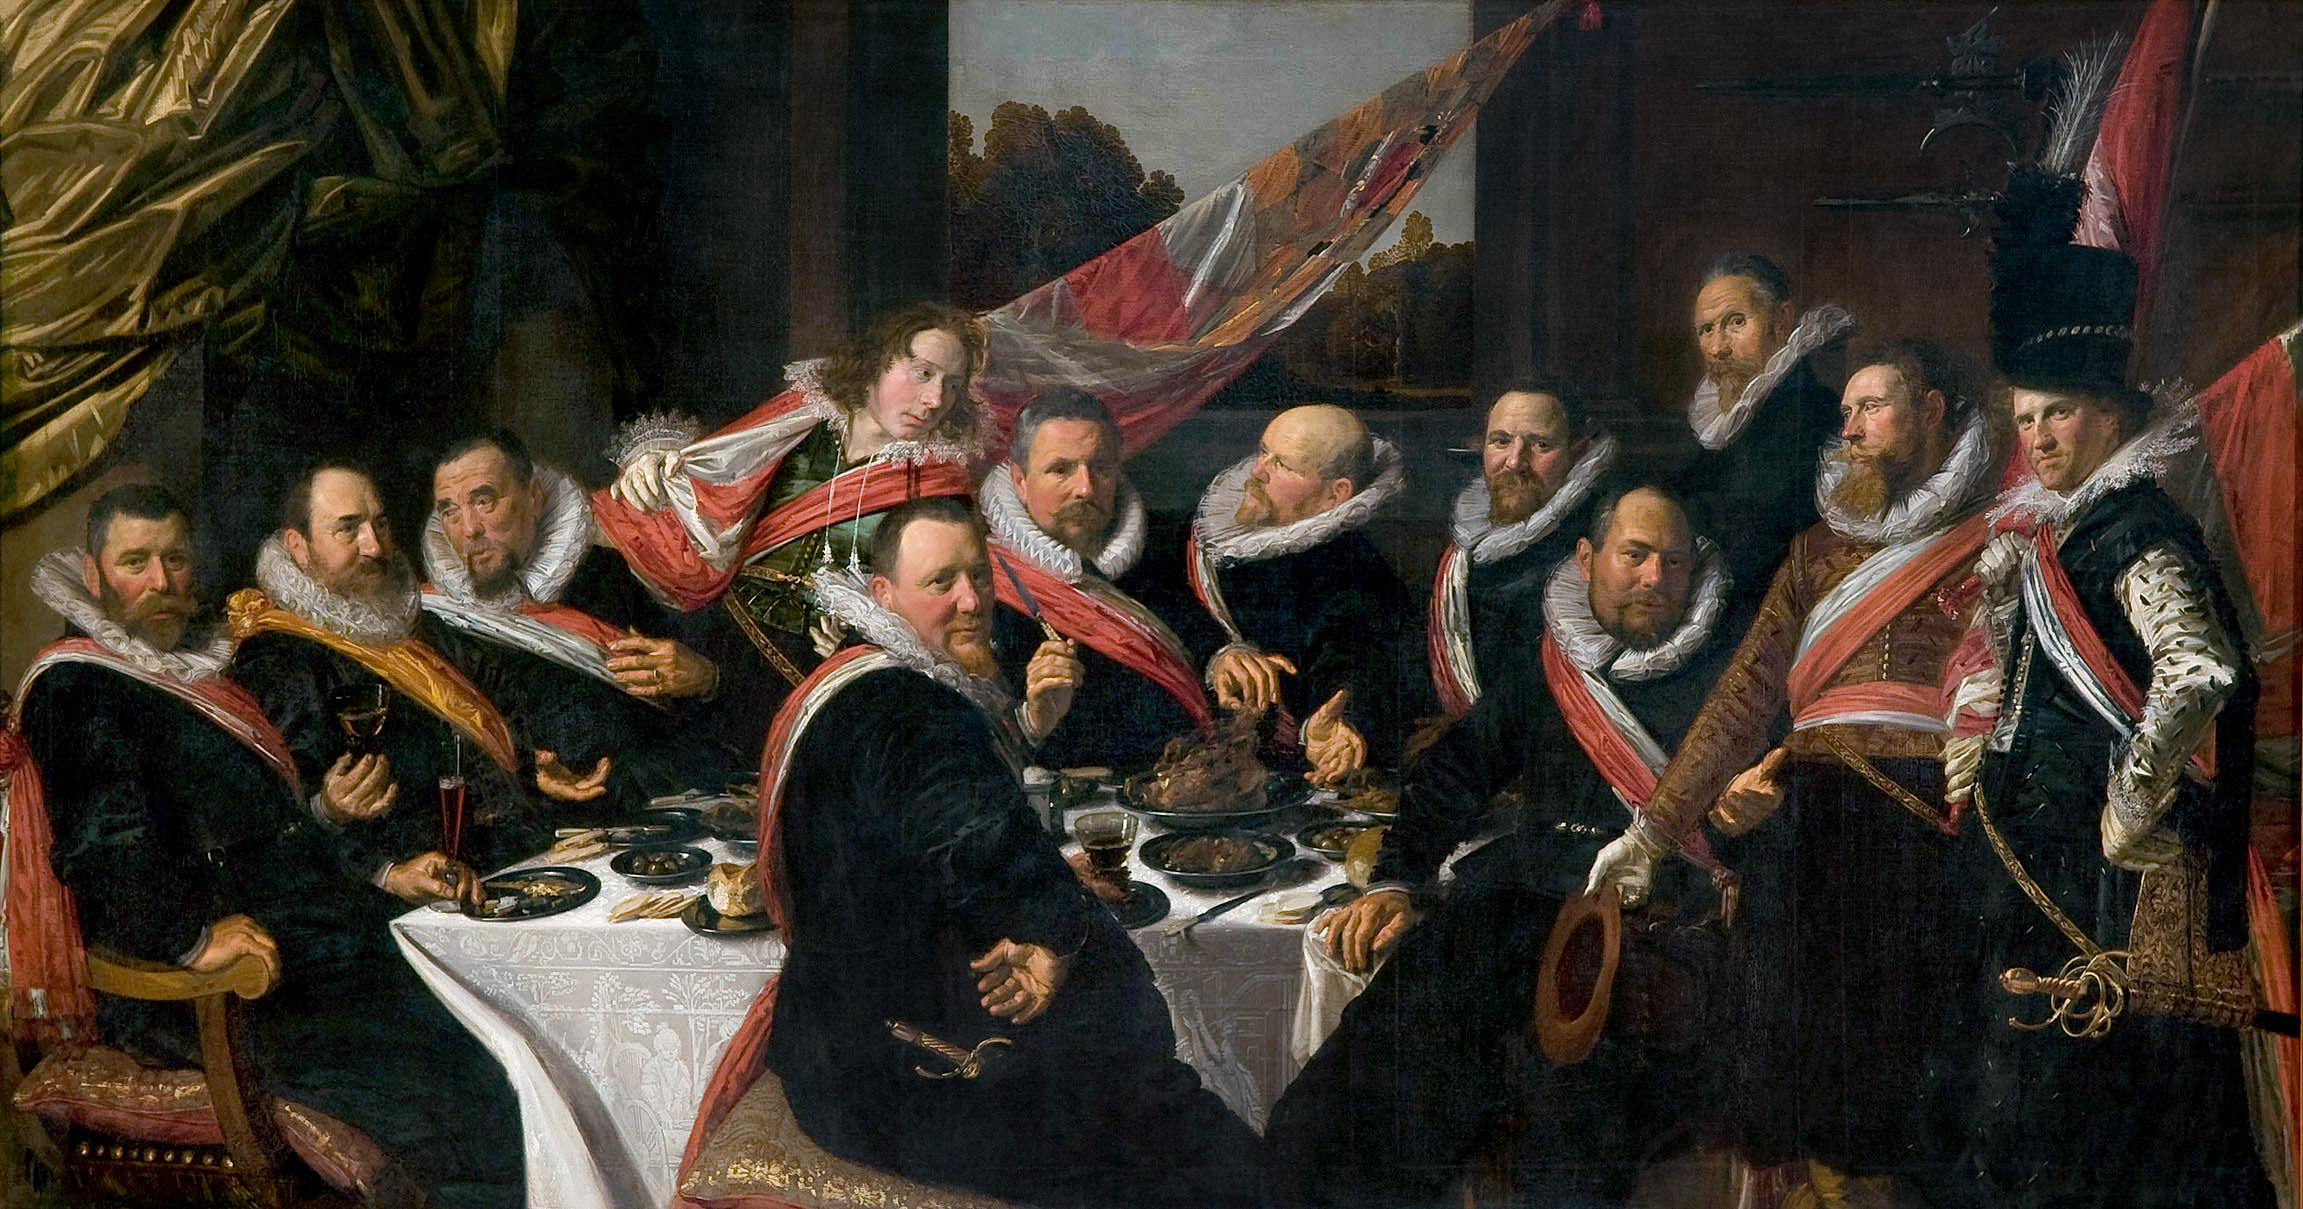 Banquet of the Officers of the St George Civic Guard by Frans Hals - 1616 - 175 x 324 cm Frans Hals Museum